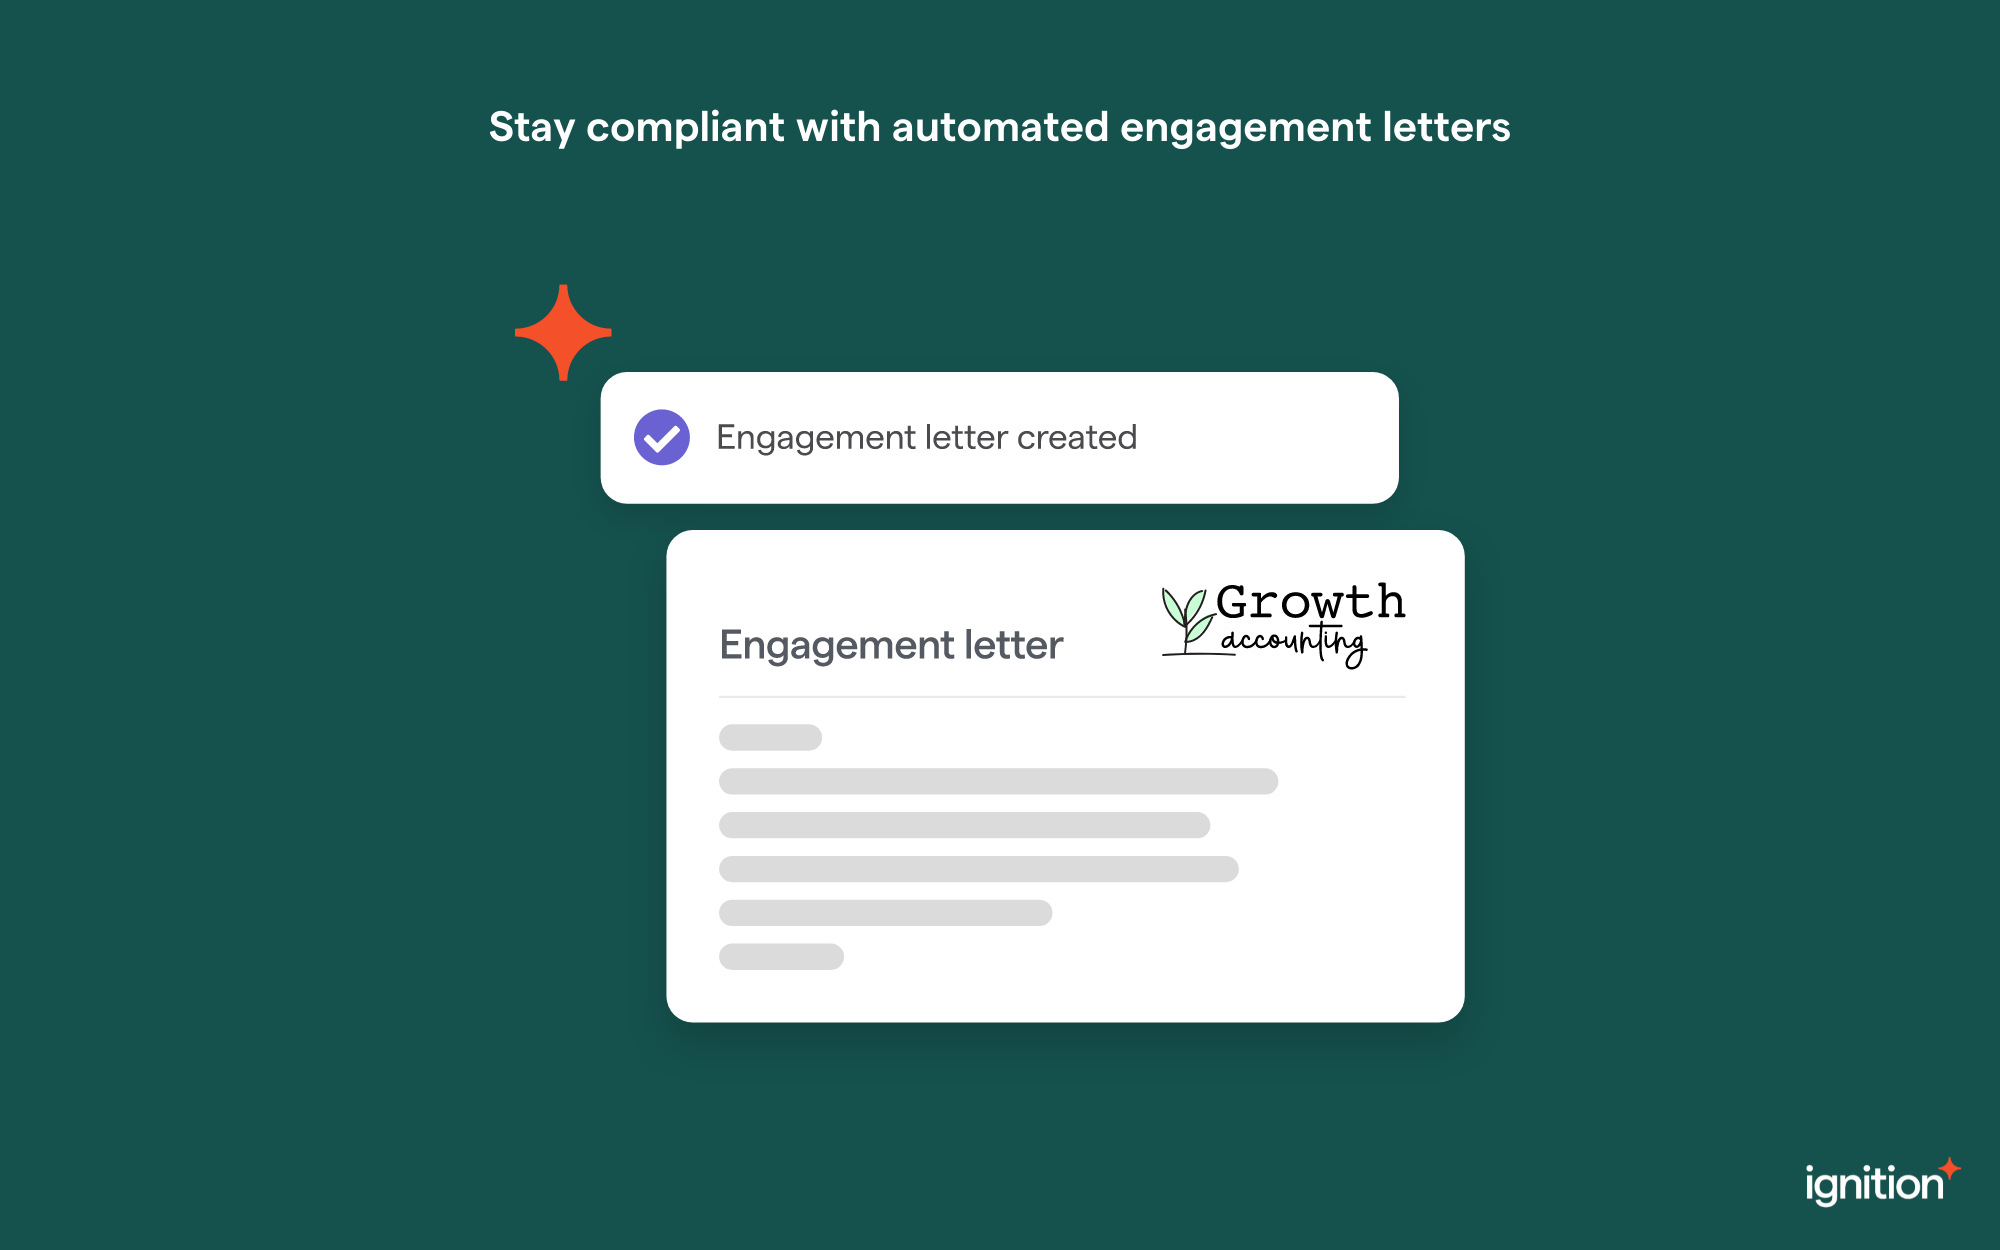 Ignition Software - Automated engagement letters